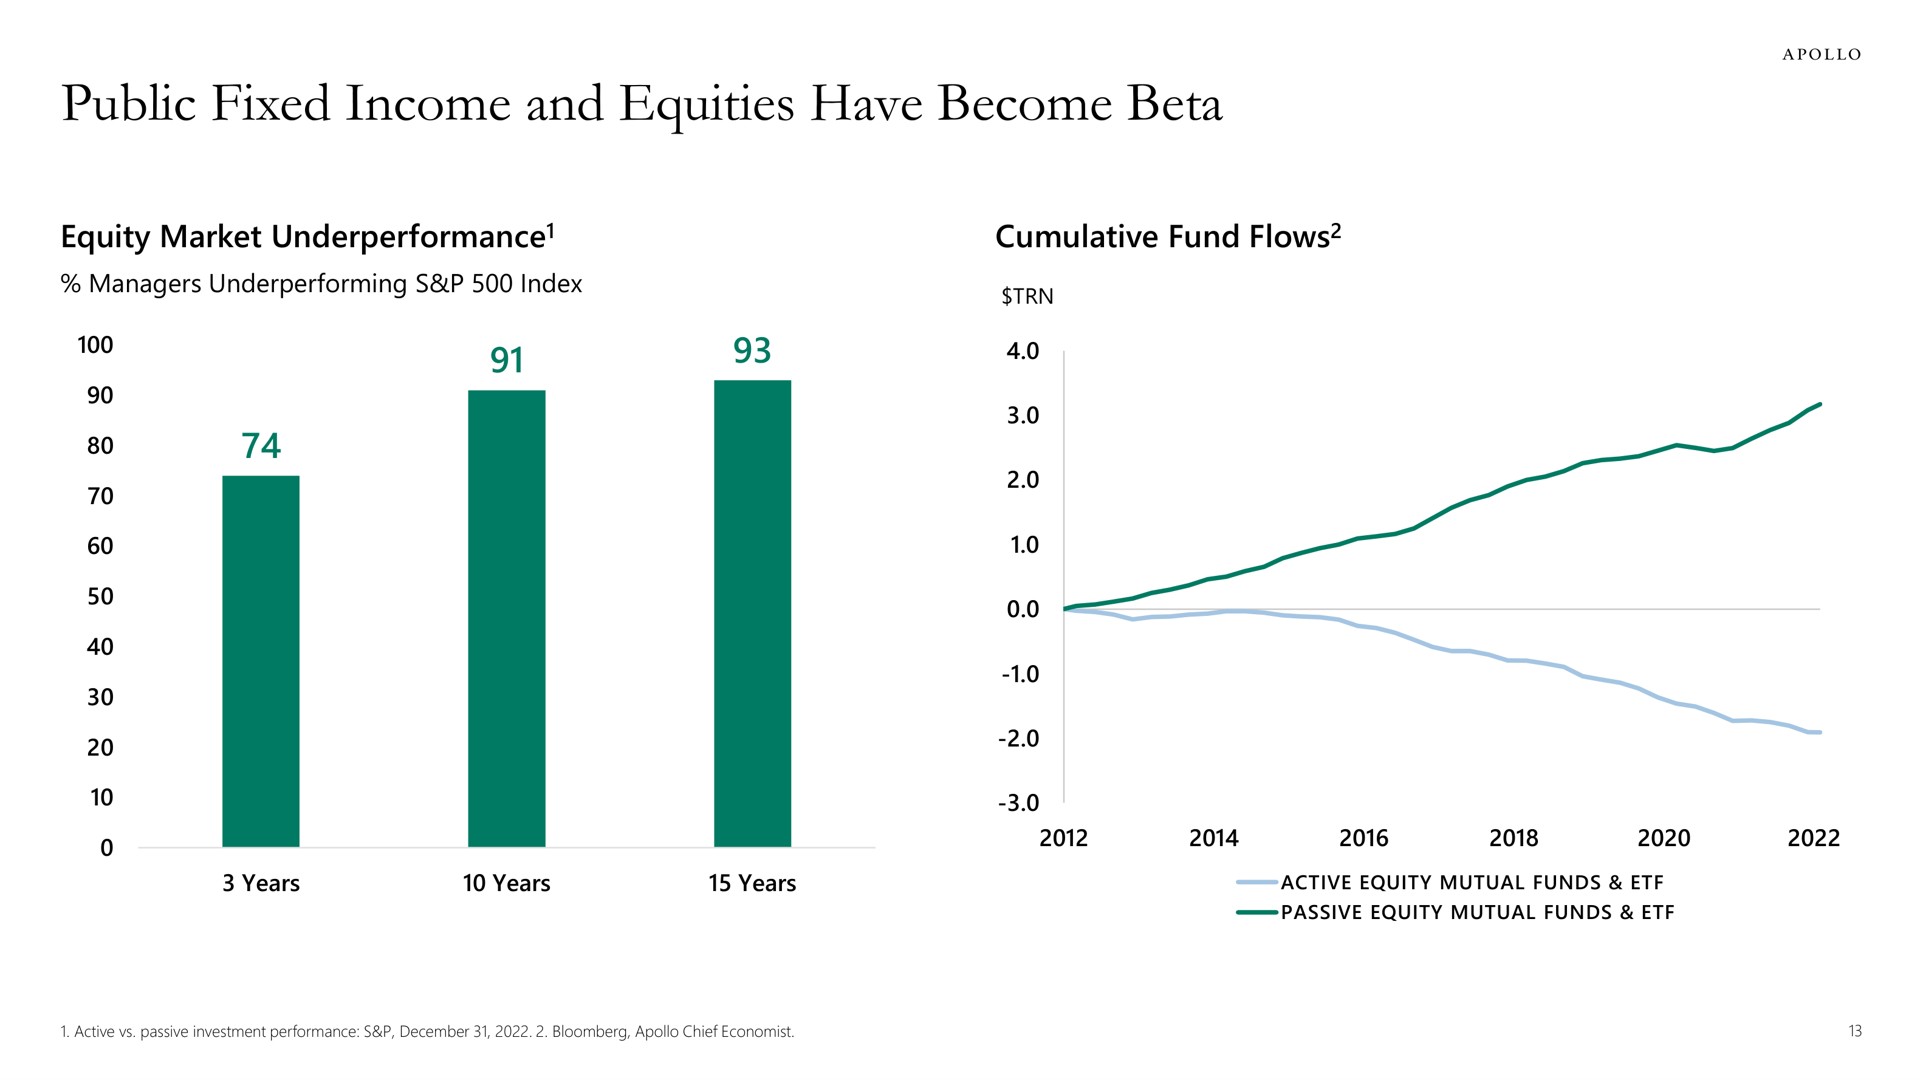 public fixed income and equities have become beta | Apollo Global Management